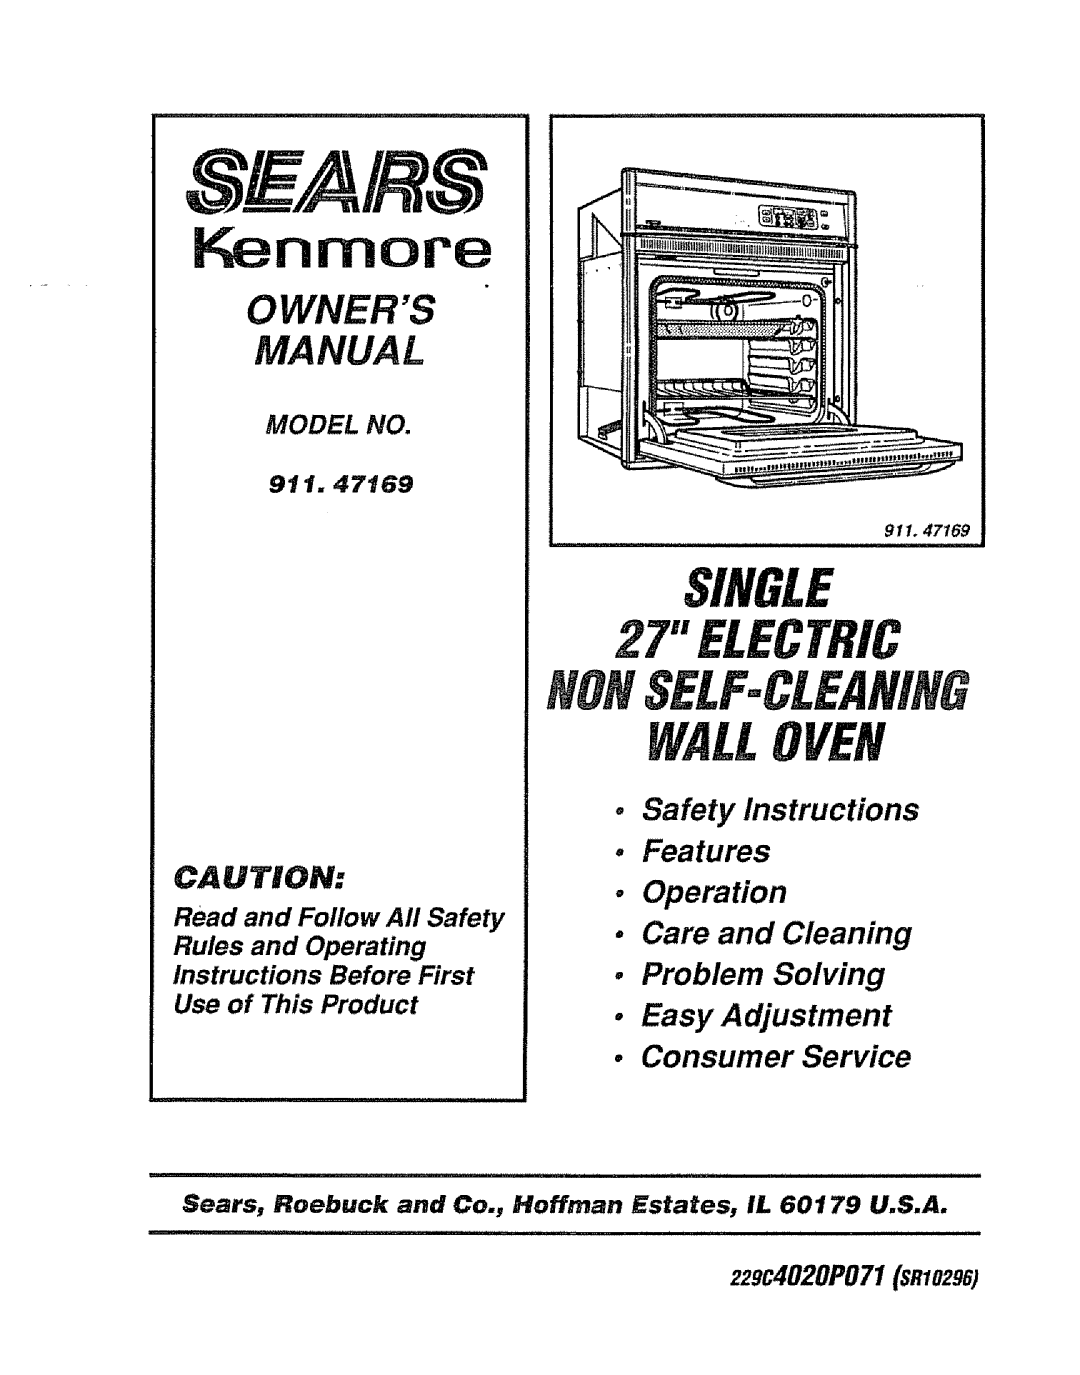 Sears 911. 47169 owner manual 911.47169, Kenmore, SINGLE 27 ELECTRIC NONSELFoCLEANiNG, Care and Cleaning Problem Solving 